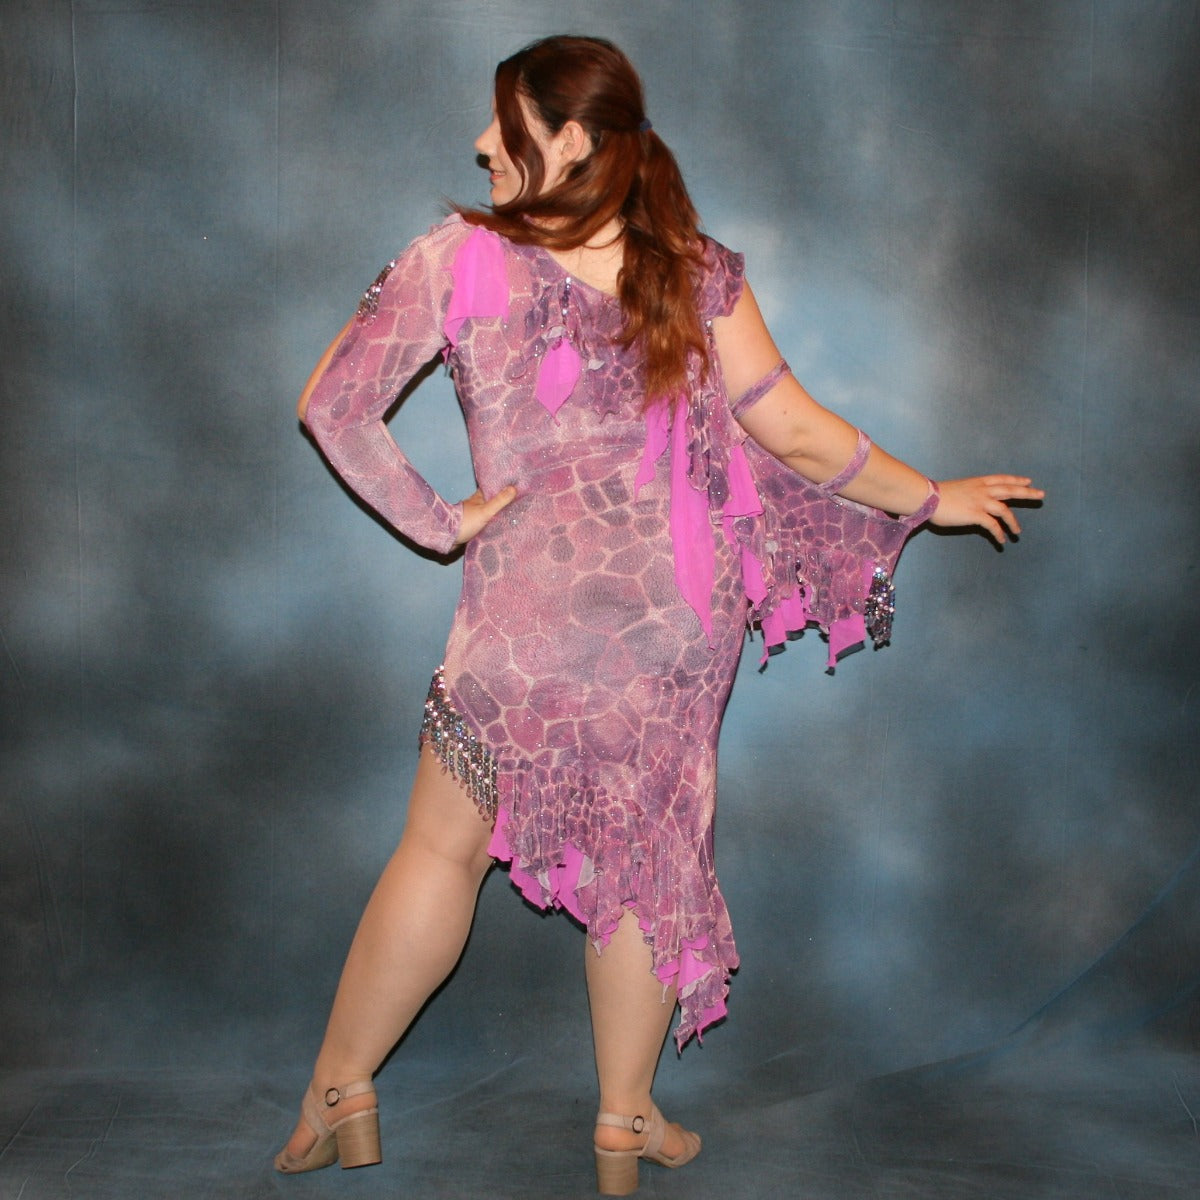 Crystal's Creations back view of Orchid Latin/rhythm dress created of wild orchid & violet printed glitter slinky has orchid accents, flounces on one arm & skirt, embellished with Swarovski hand beading of various shades of orchid & shapes through out, is a fun & colorful Latin/rhythm dress